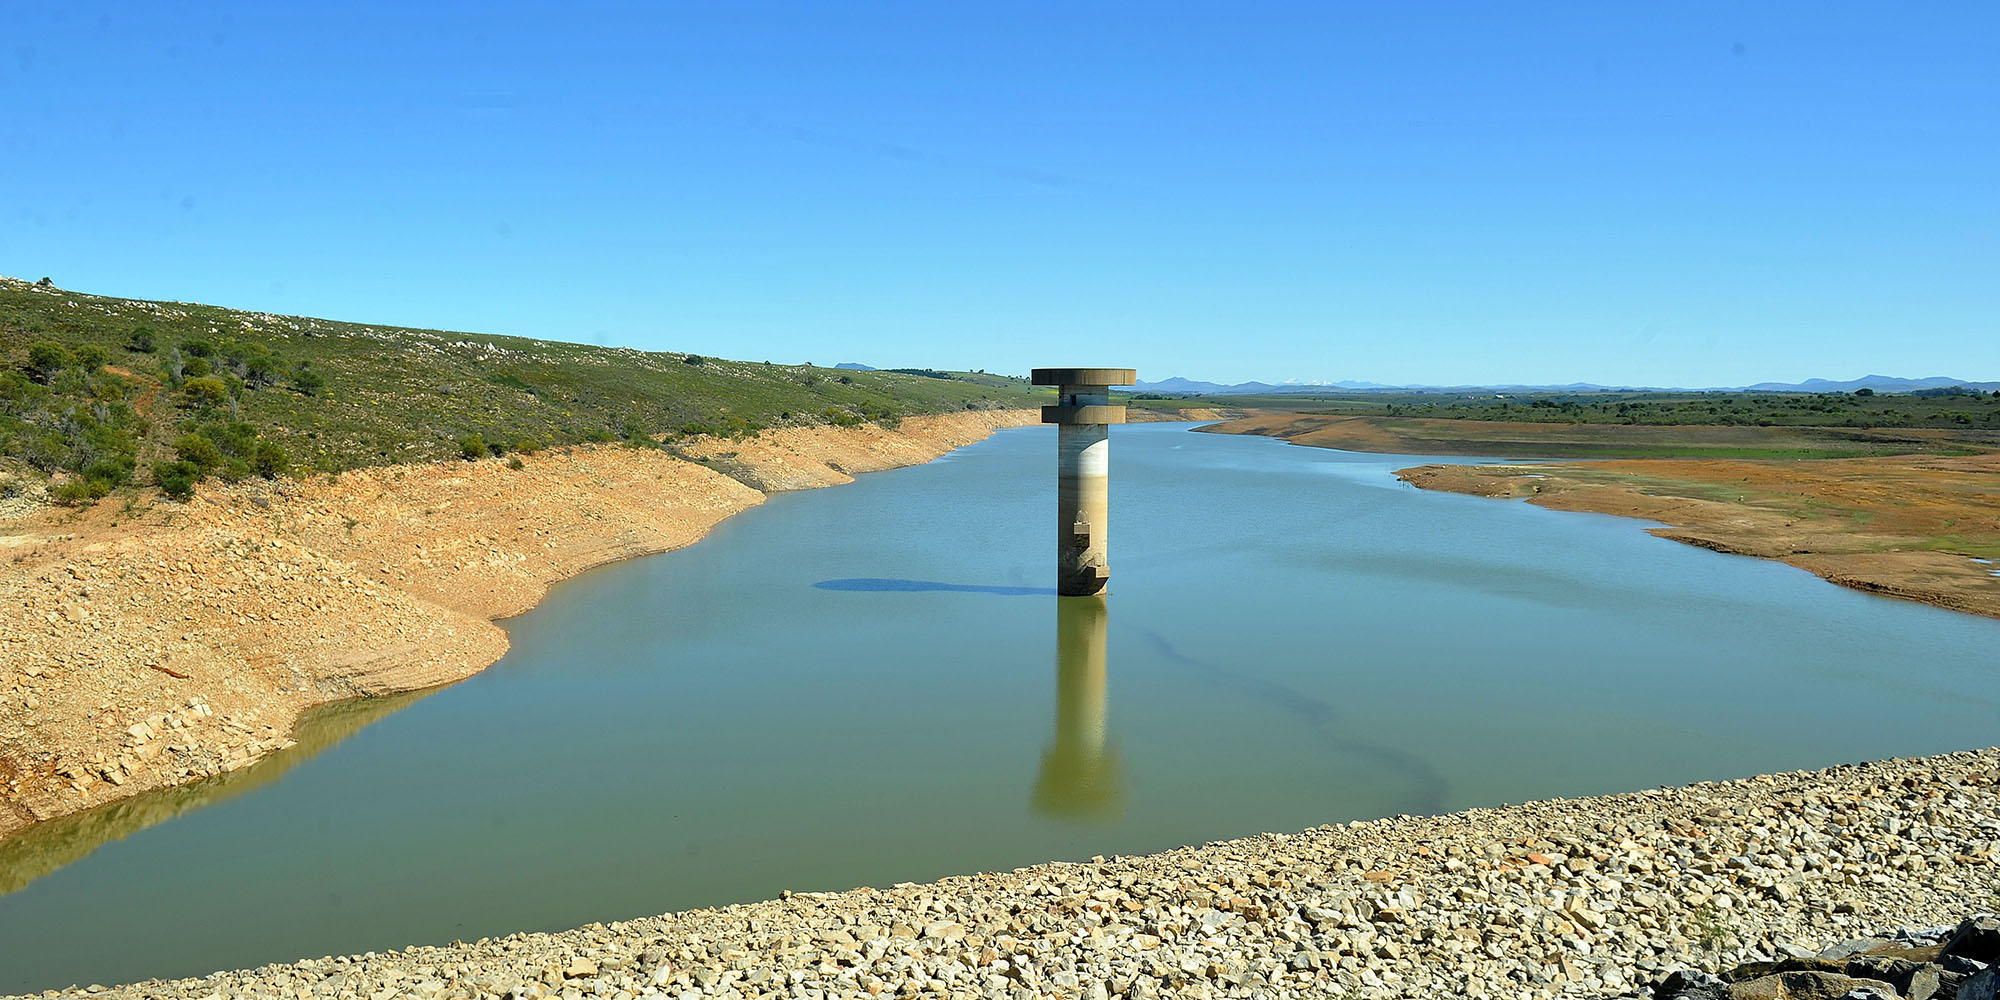 Nelson Mandela Bay water shortage becomes crisis as second-largest dam is close to running dry - Daily Maverick